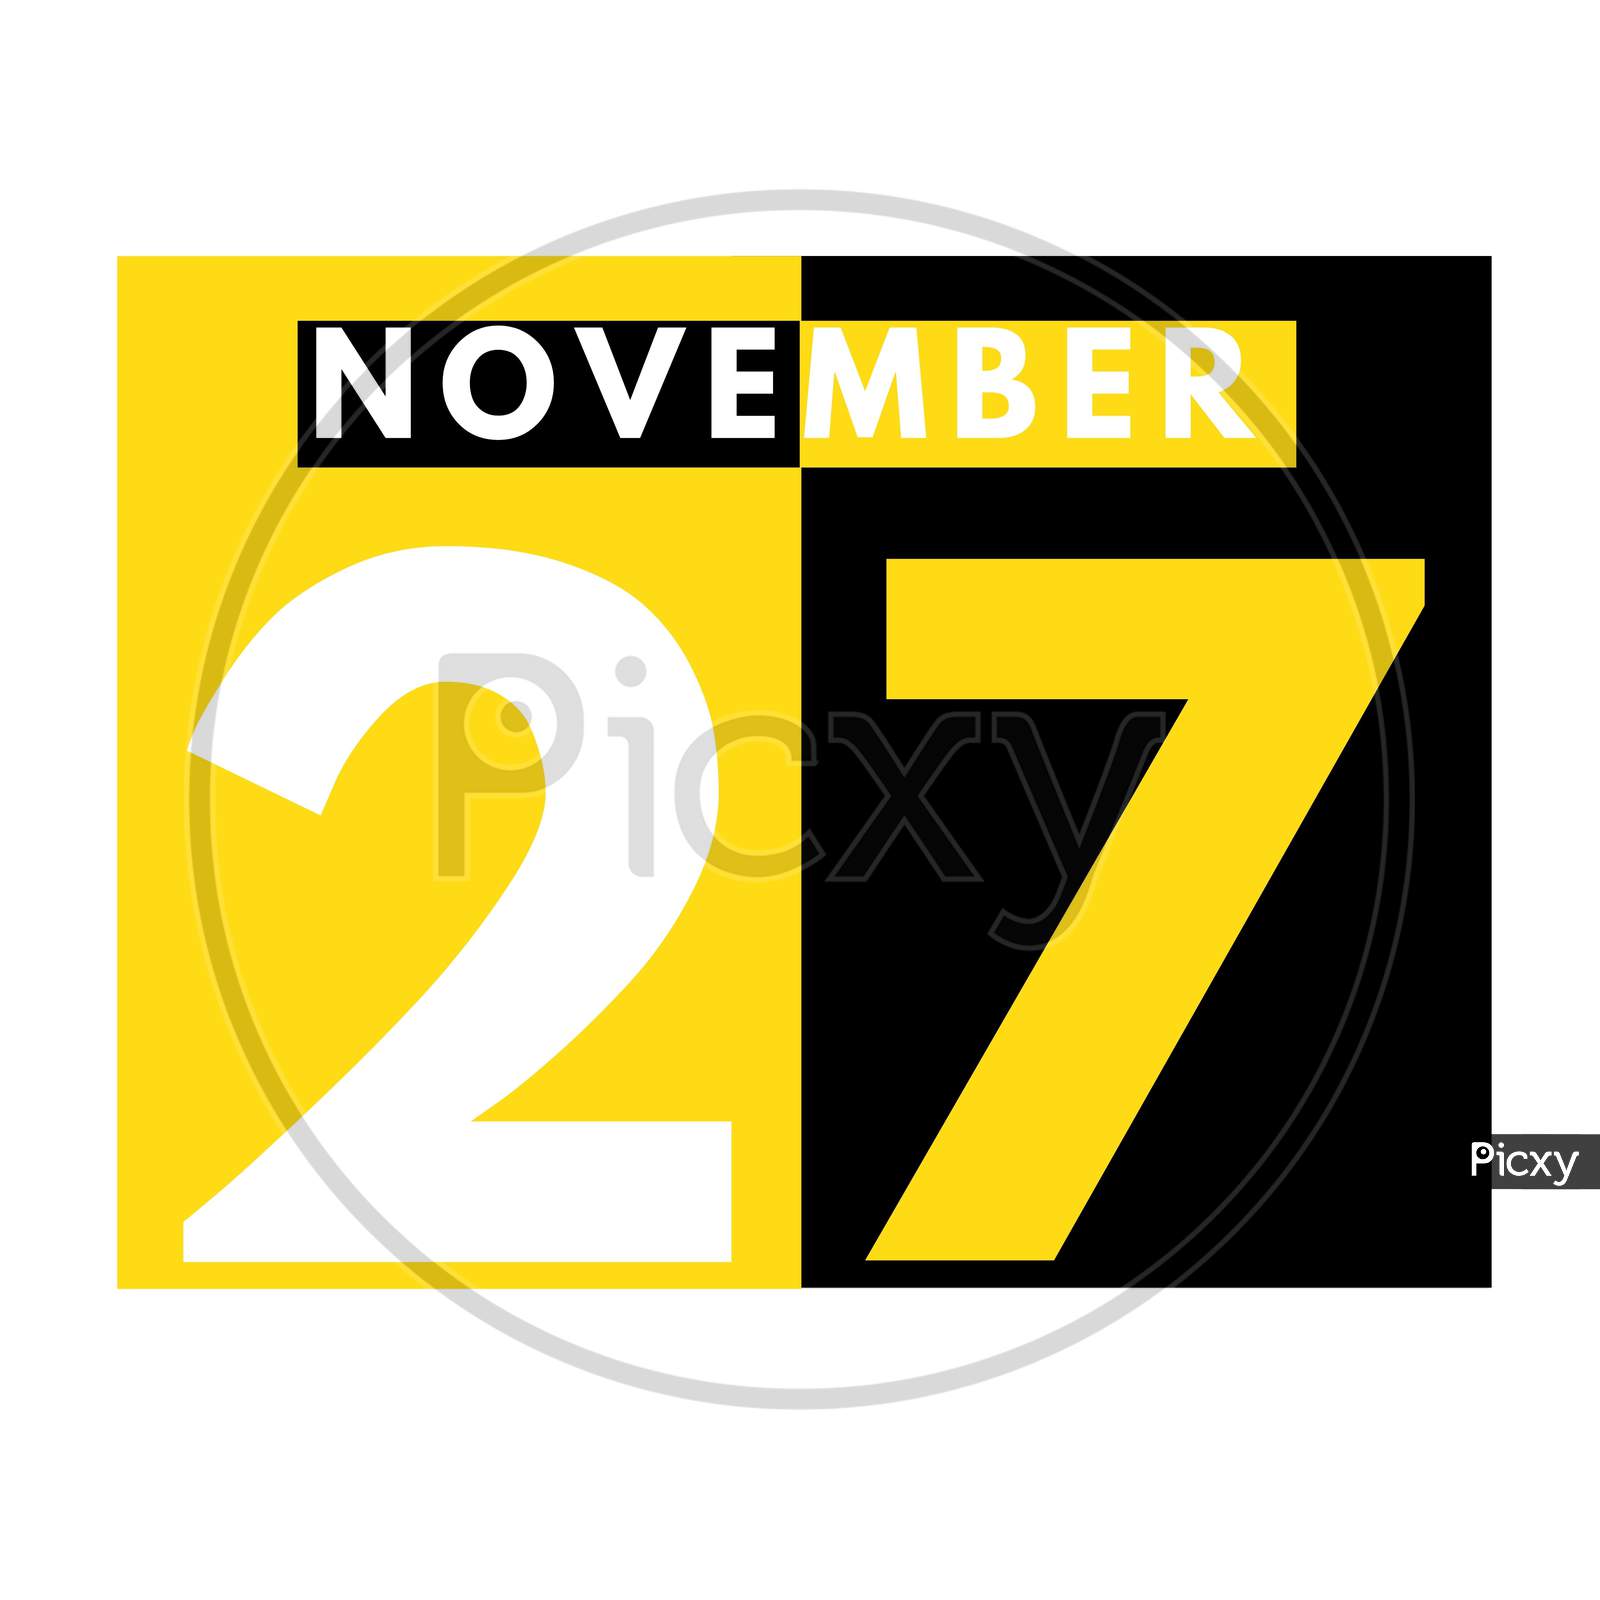 November 27 . Modern Daily Calendar Icon .Date ,Day, Month .Calendar For The Month Of November